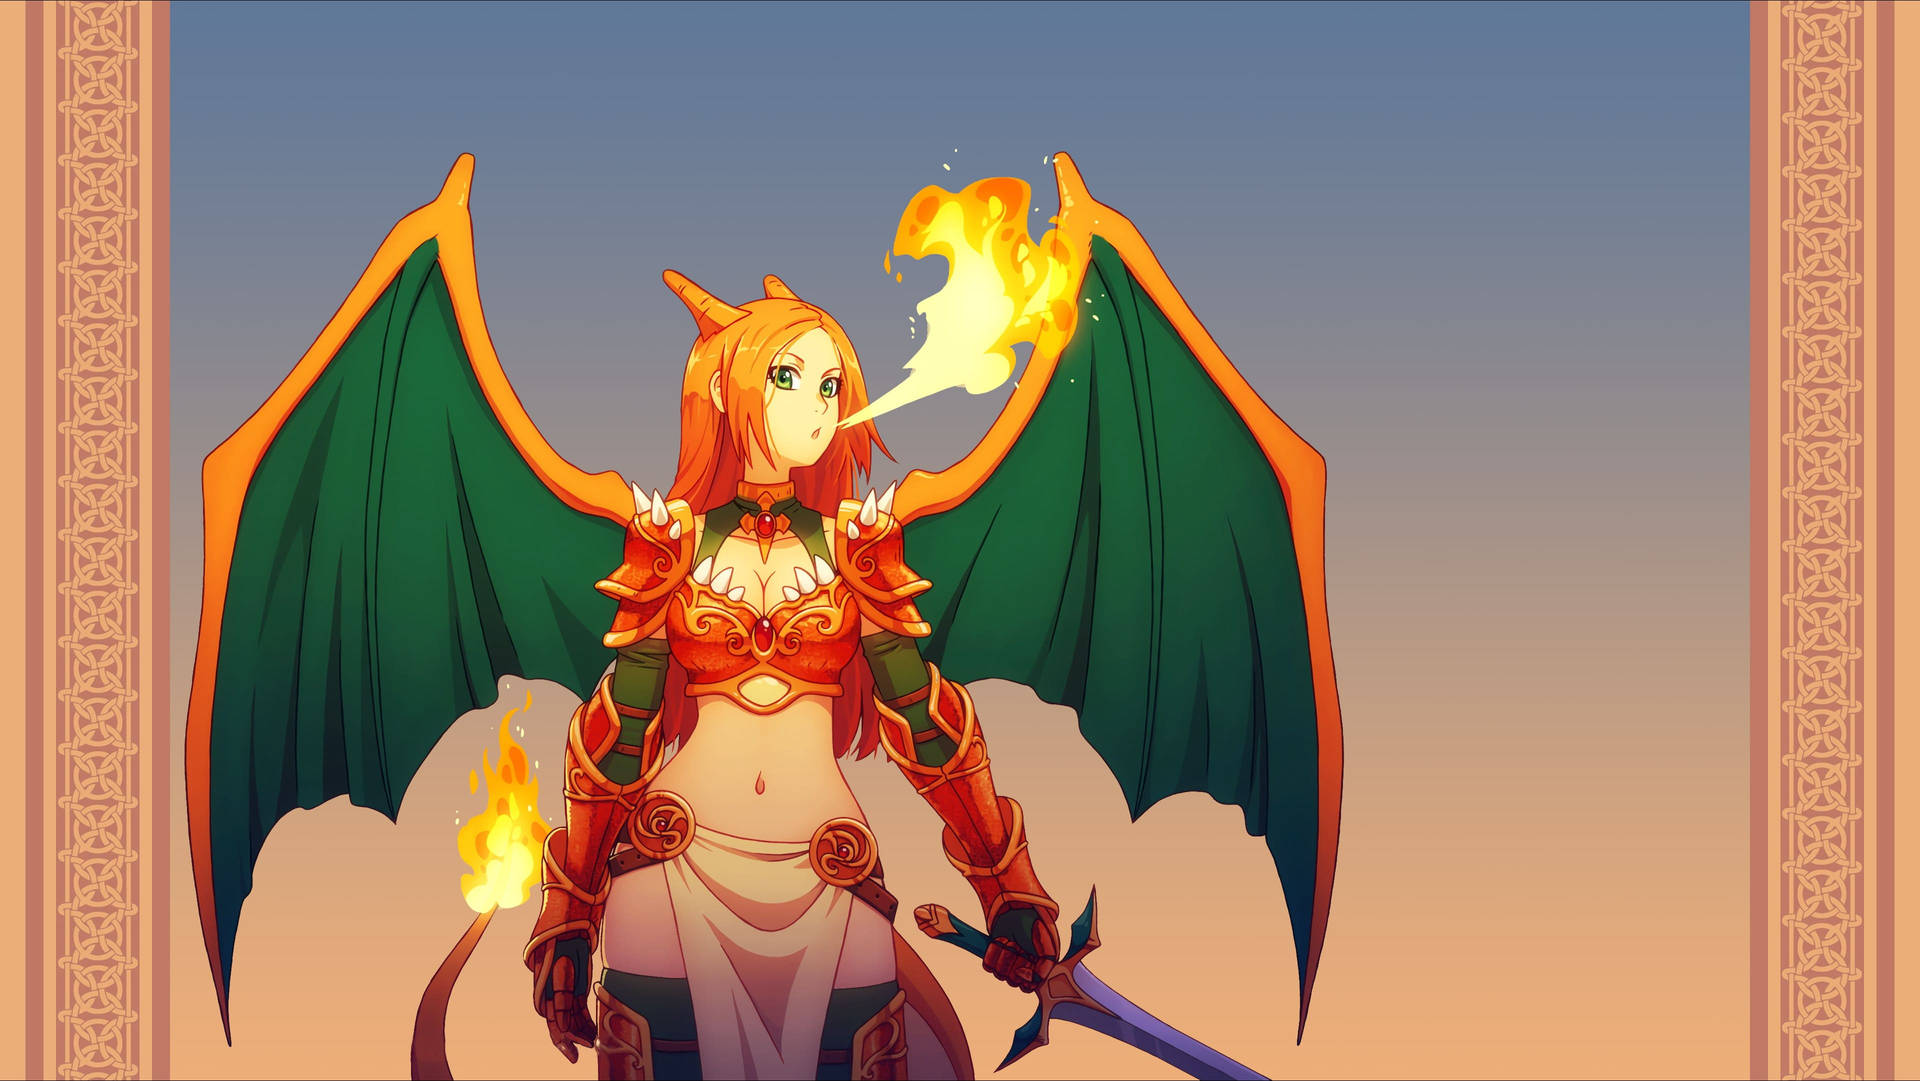 Captivating Anime Charizard Girl in Action Wallpaper